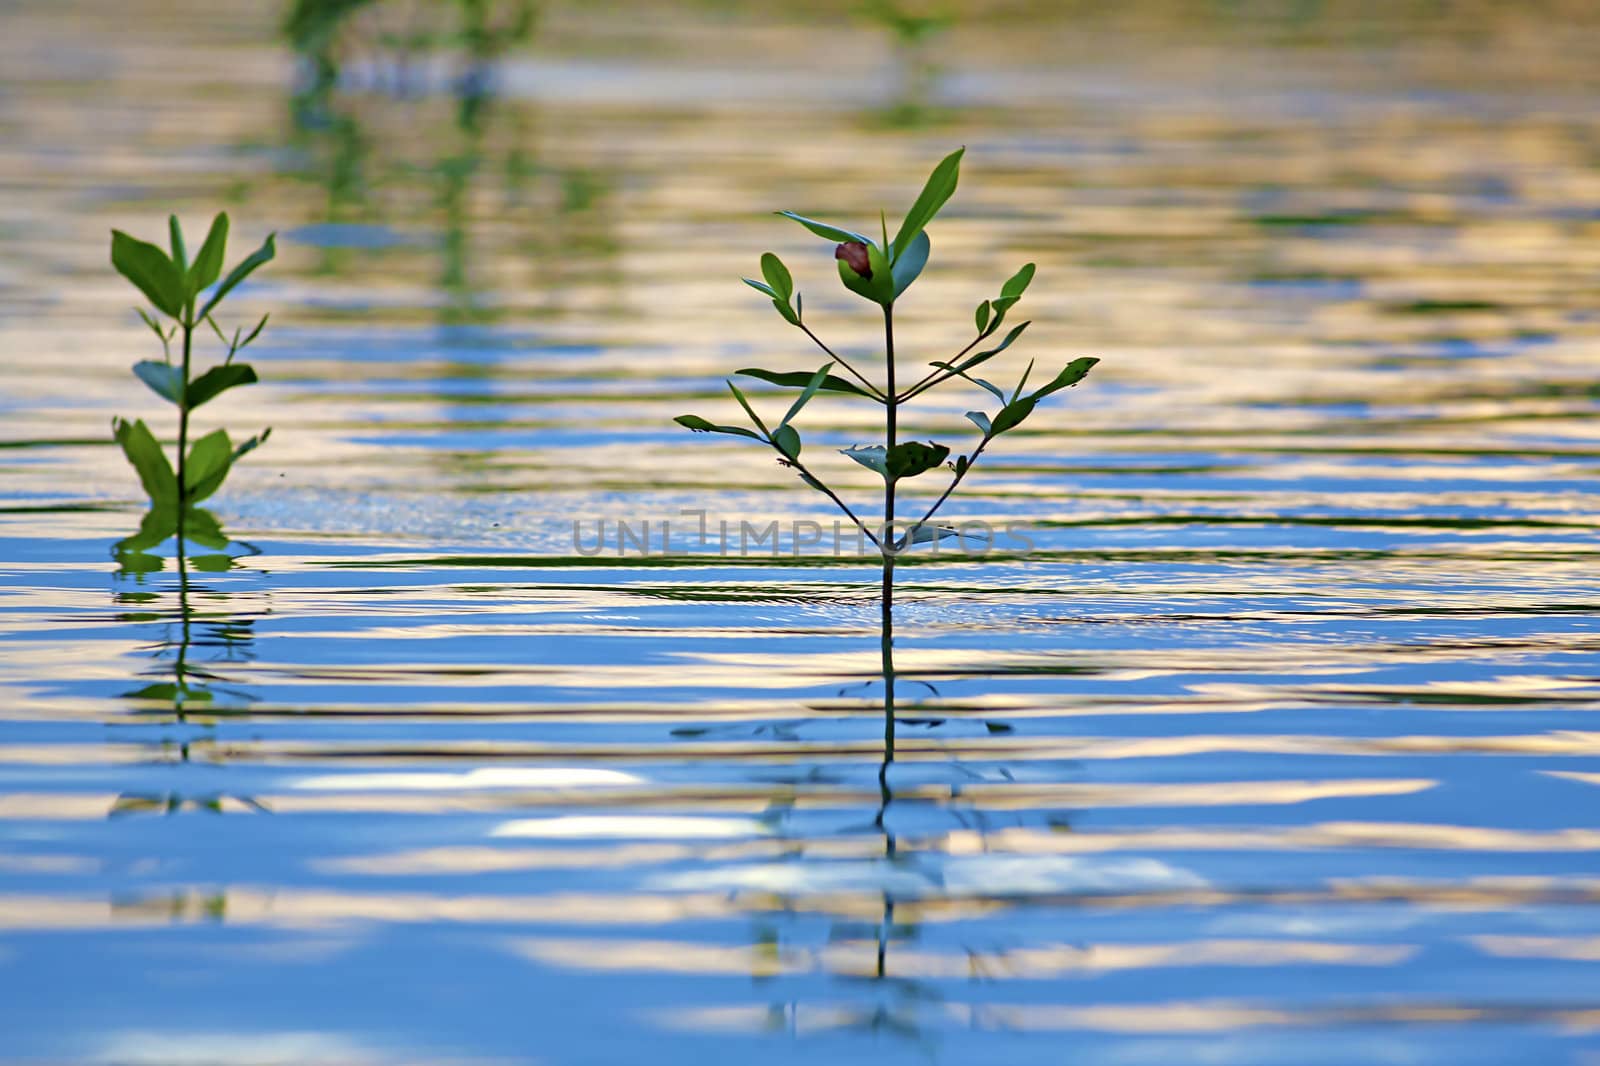 Mangrove seedlings casting reflections in the water at sunset